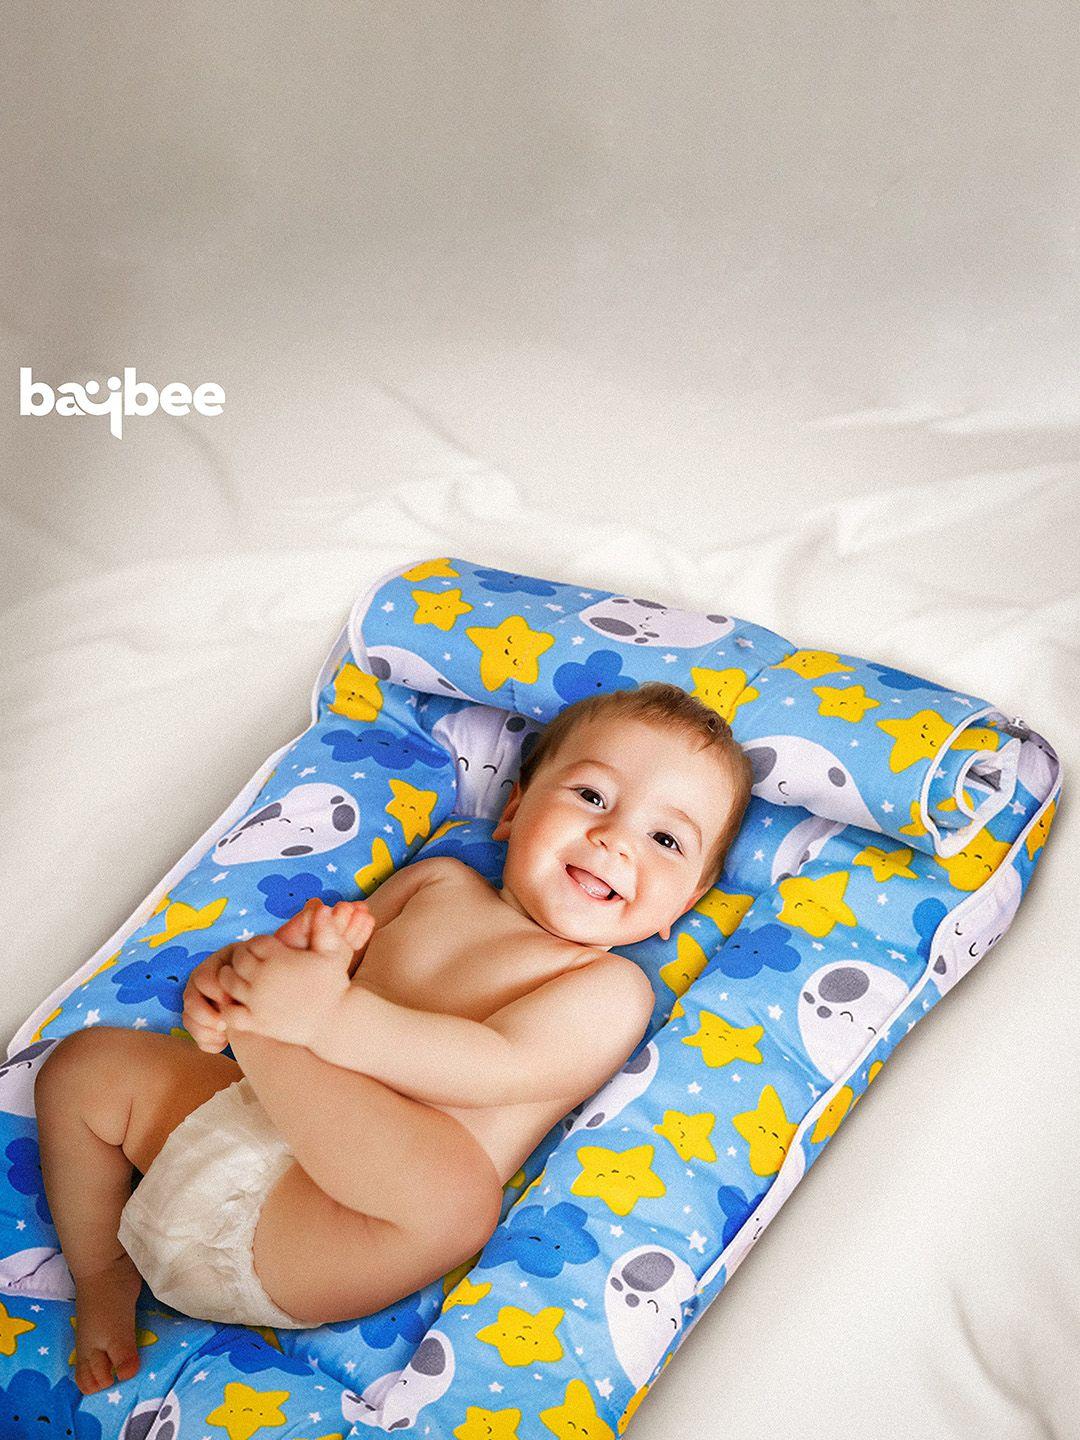 baybee infants printed pure cotton 3 in 1 baby sleeping carry bed